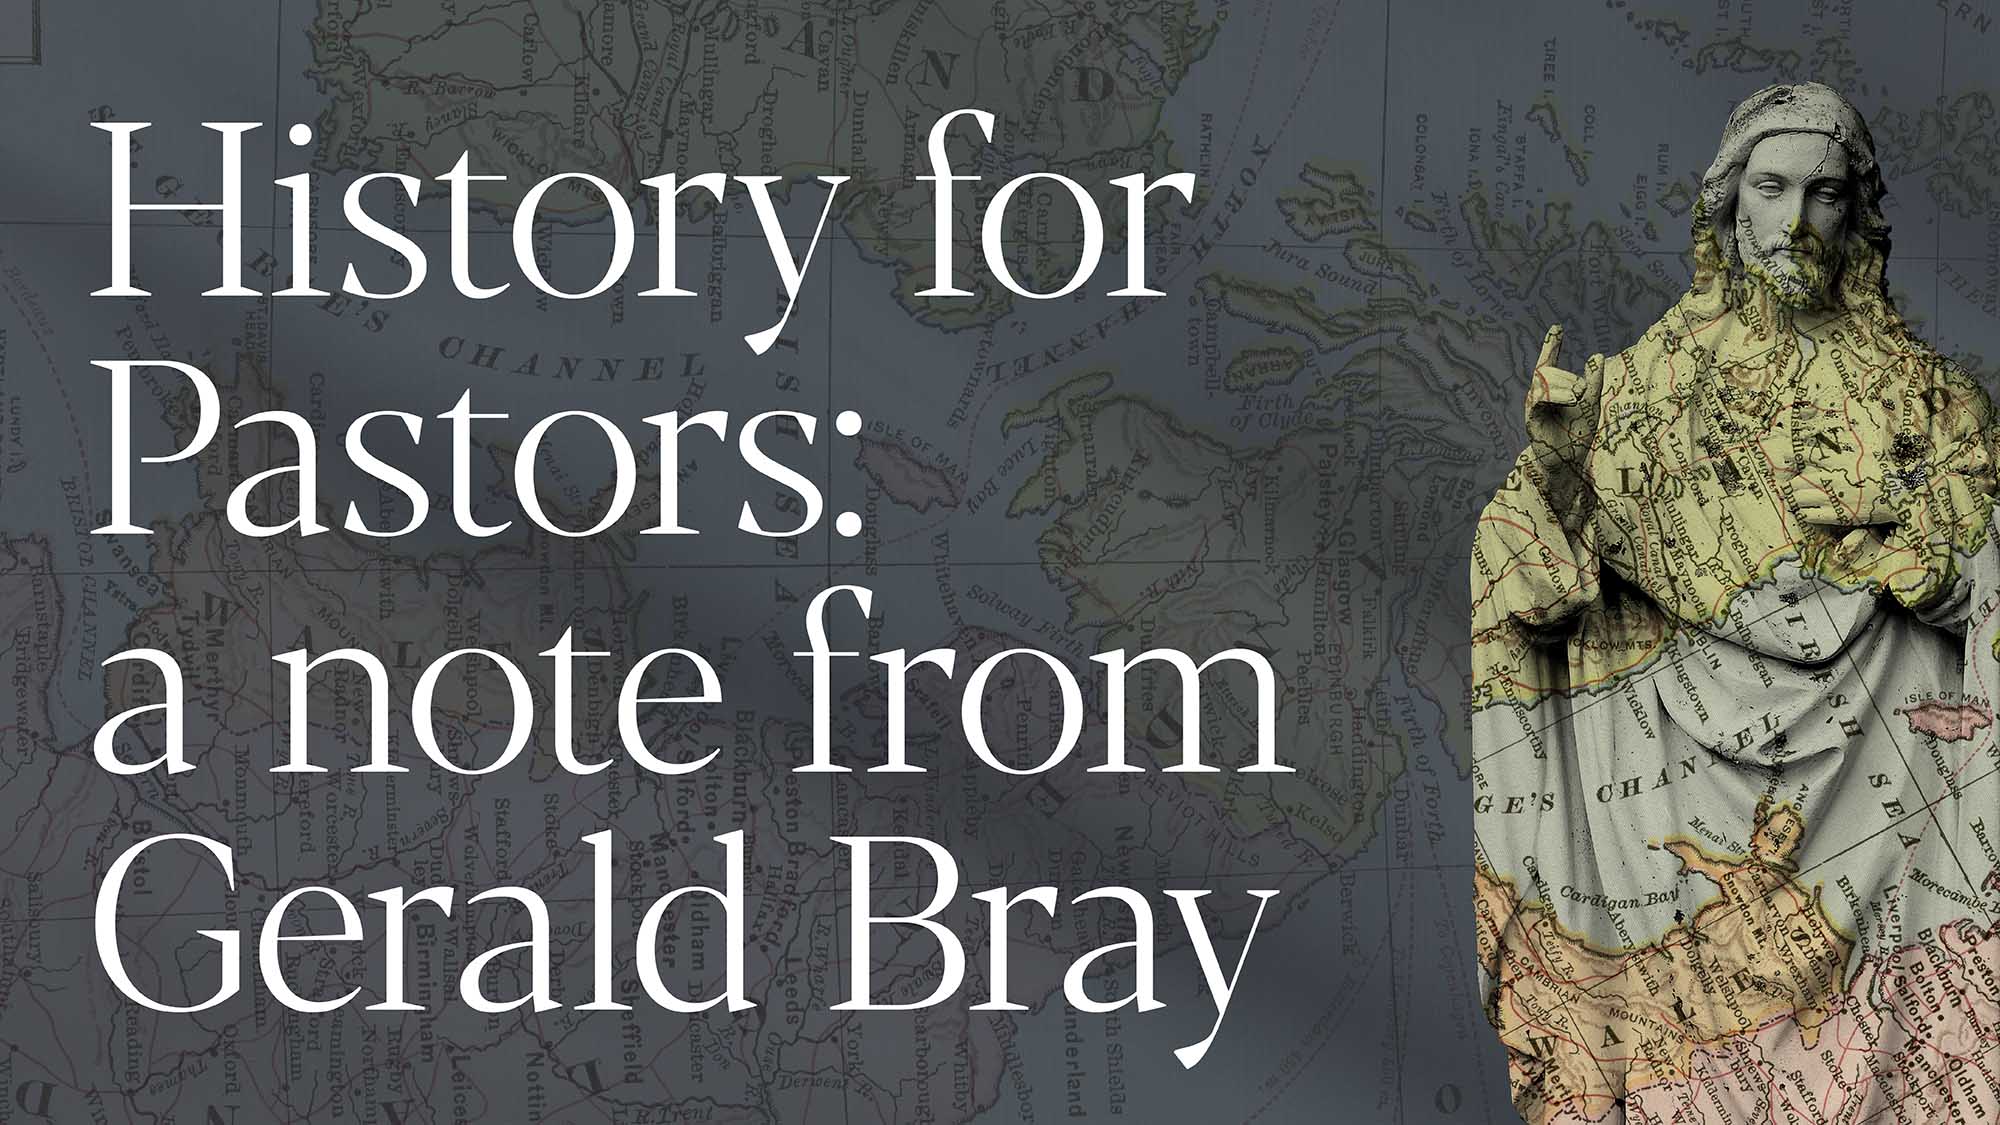 History for pastors - a note from Gerald Bray